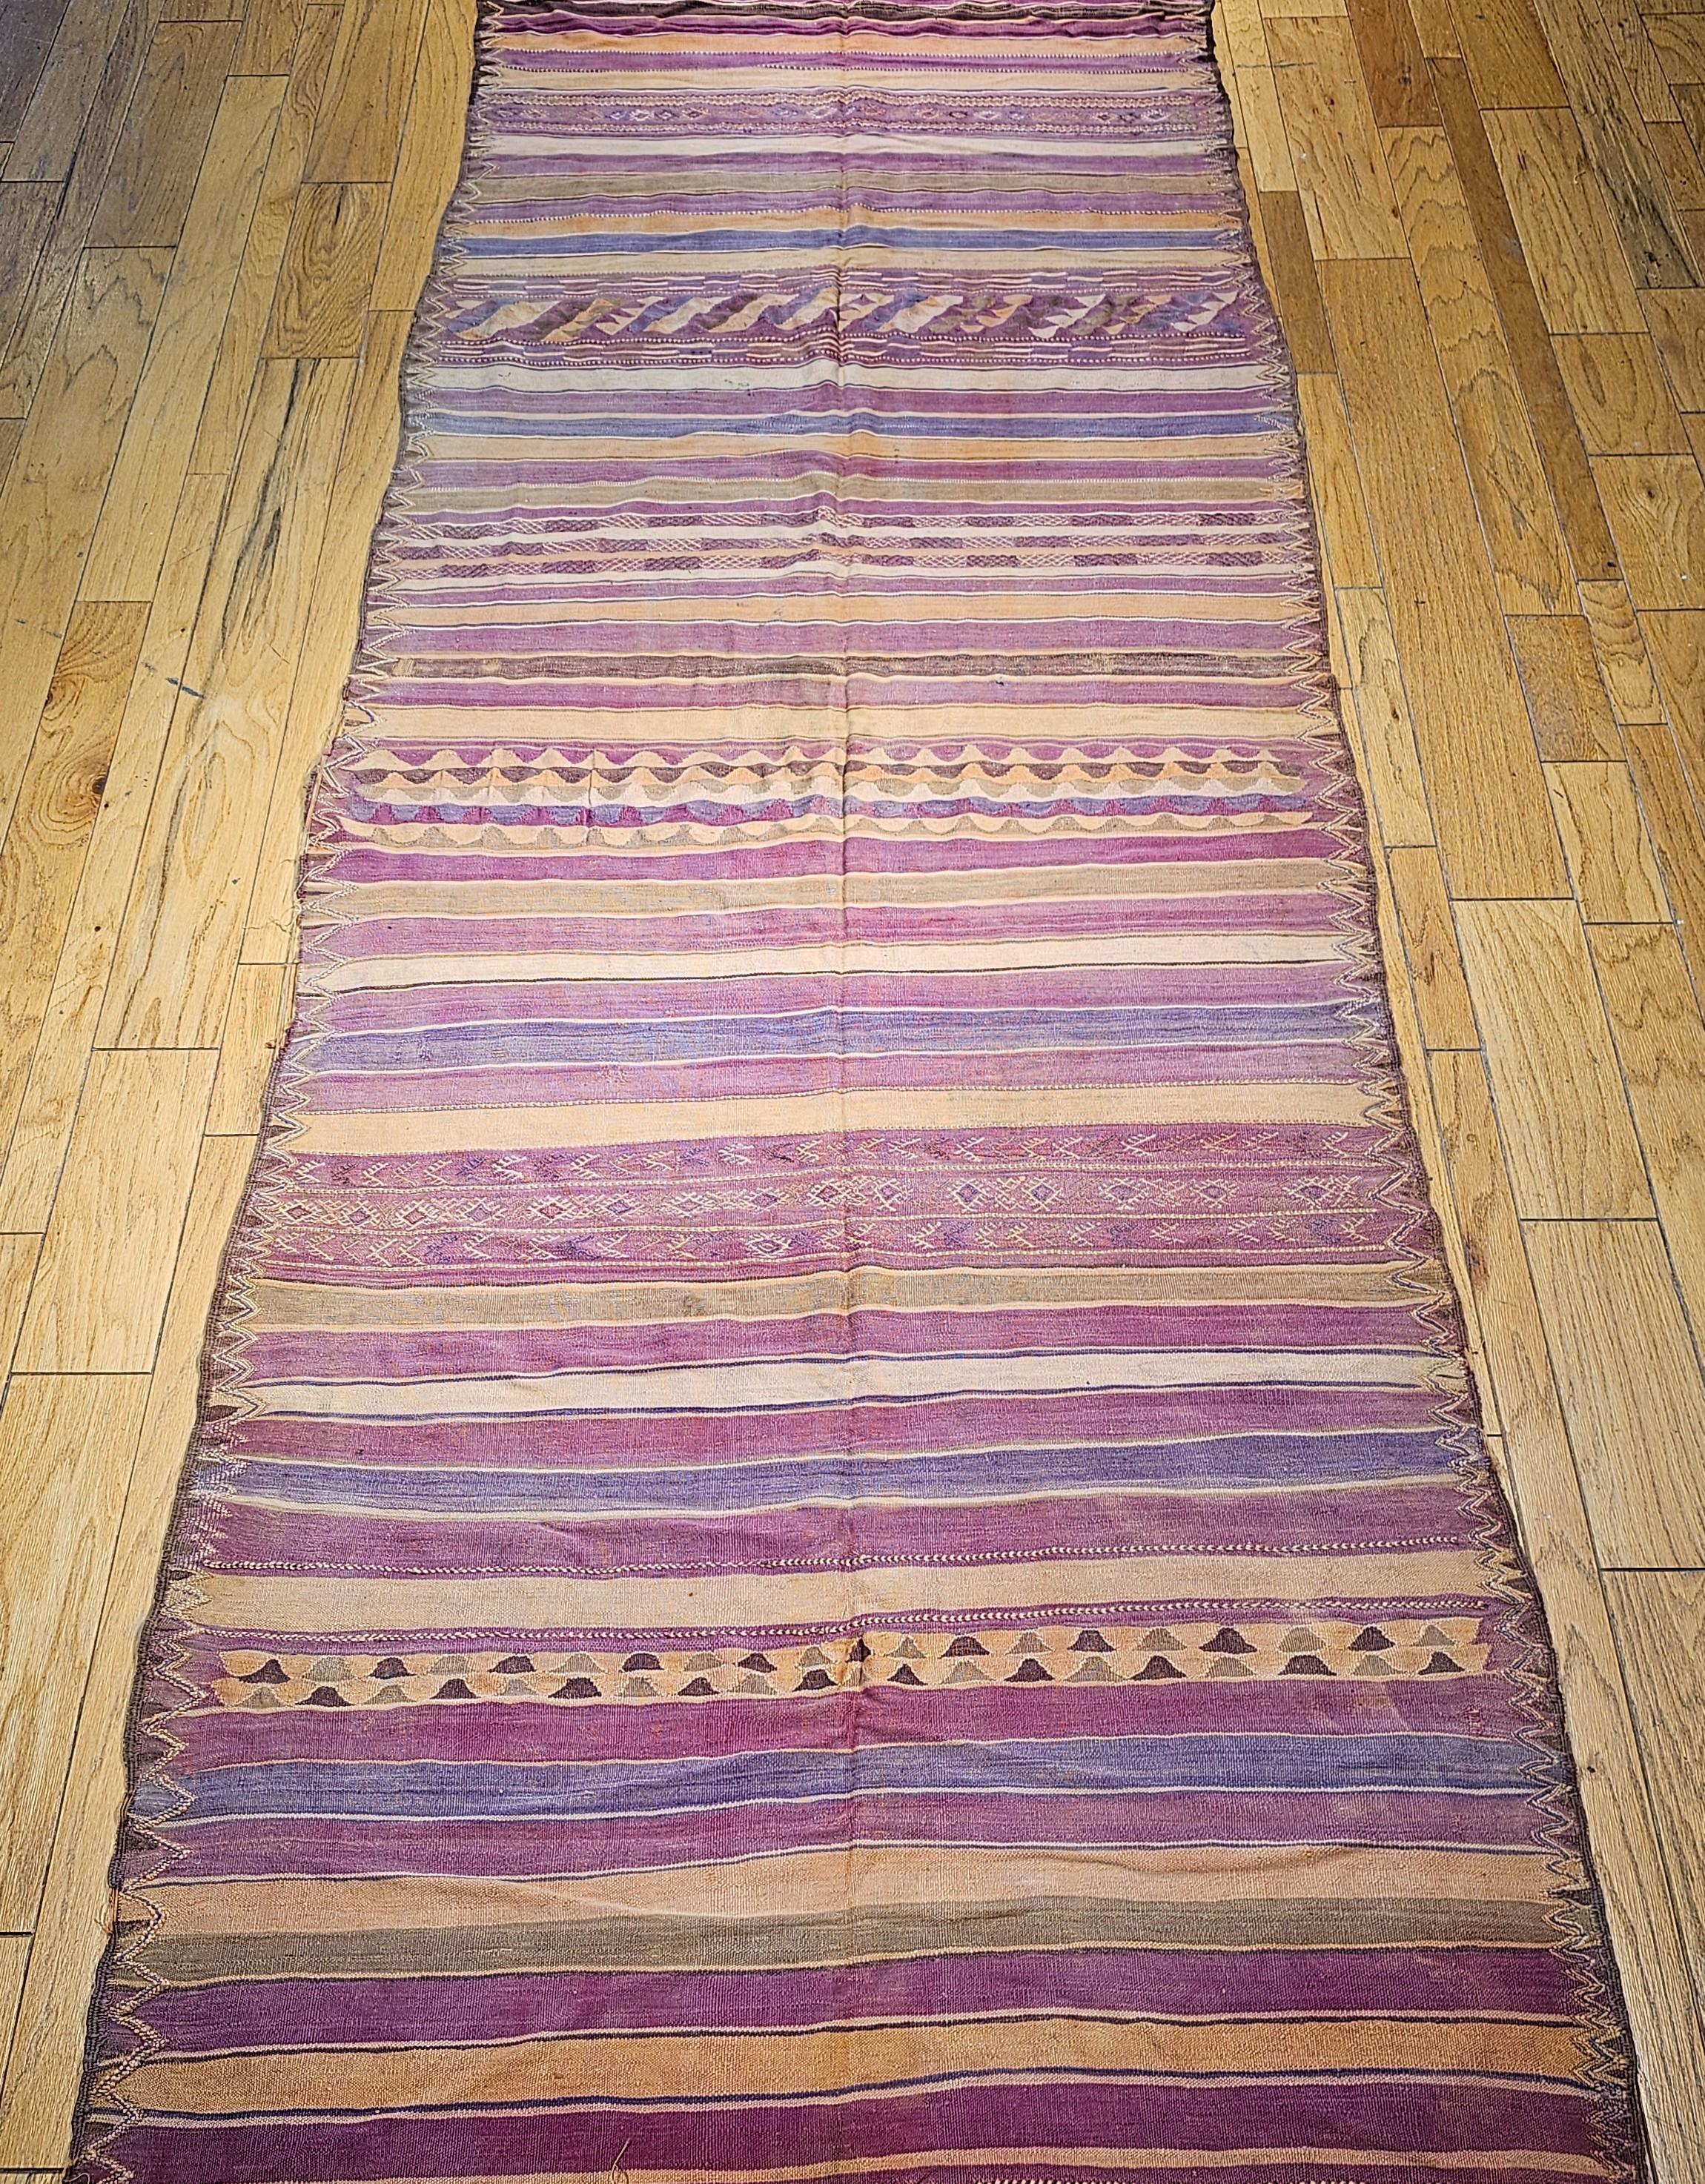 Vintage Moroccan kilim rug from the mid 1900s in a beautiful stripe pattern and wonderful soft colors in green, purple, yellow, brown, blue, and other shades.   The colors and the variations of them resemble the colors in an Arizona or New Mexico